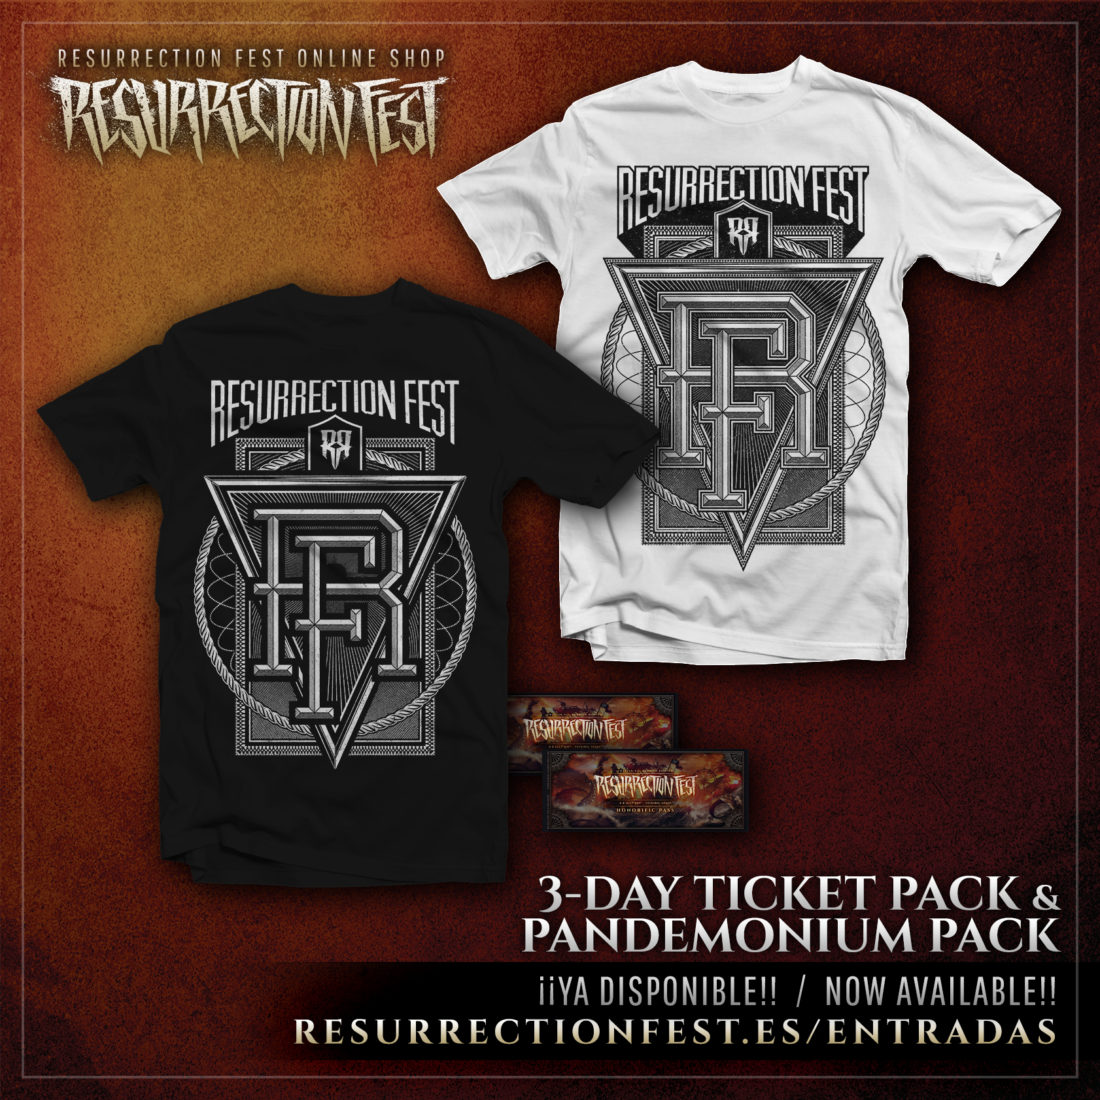 Special t-shirt + full pass pack for Christmas now on sale!